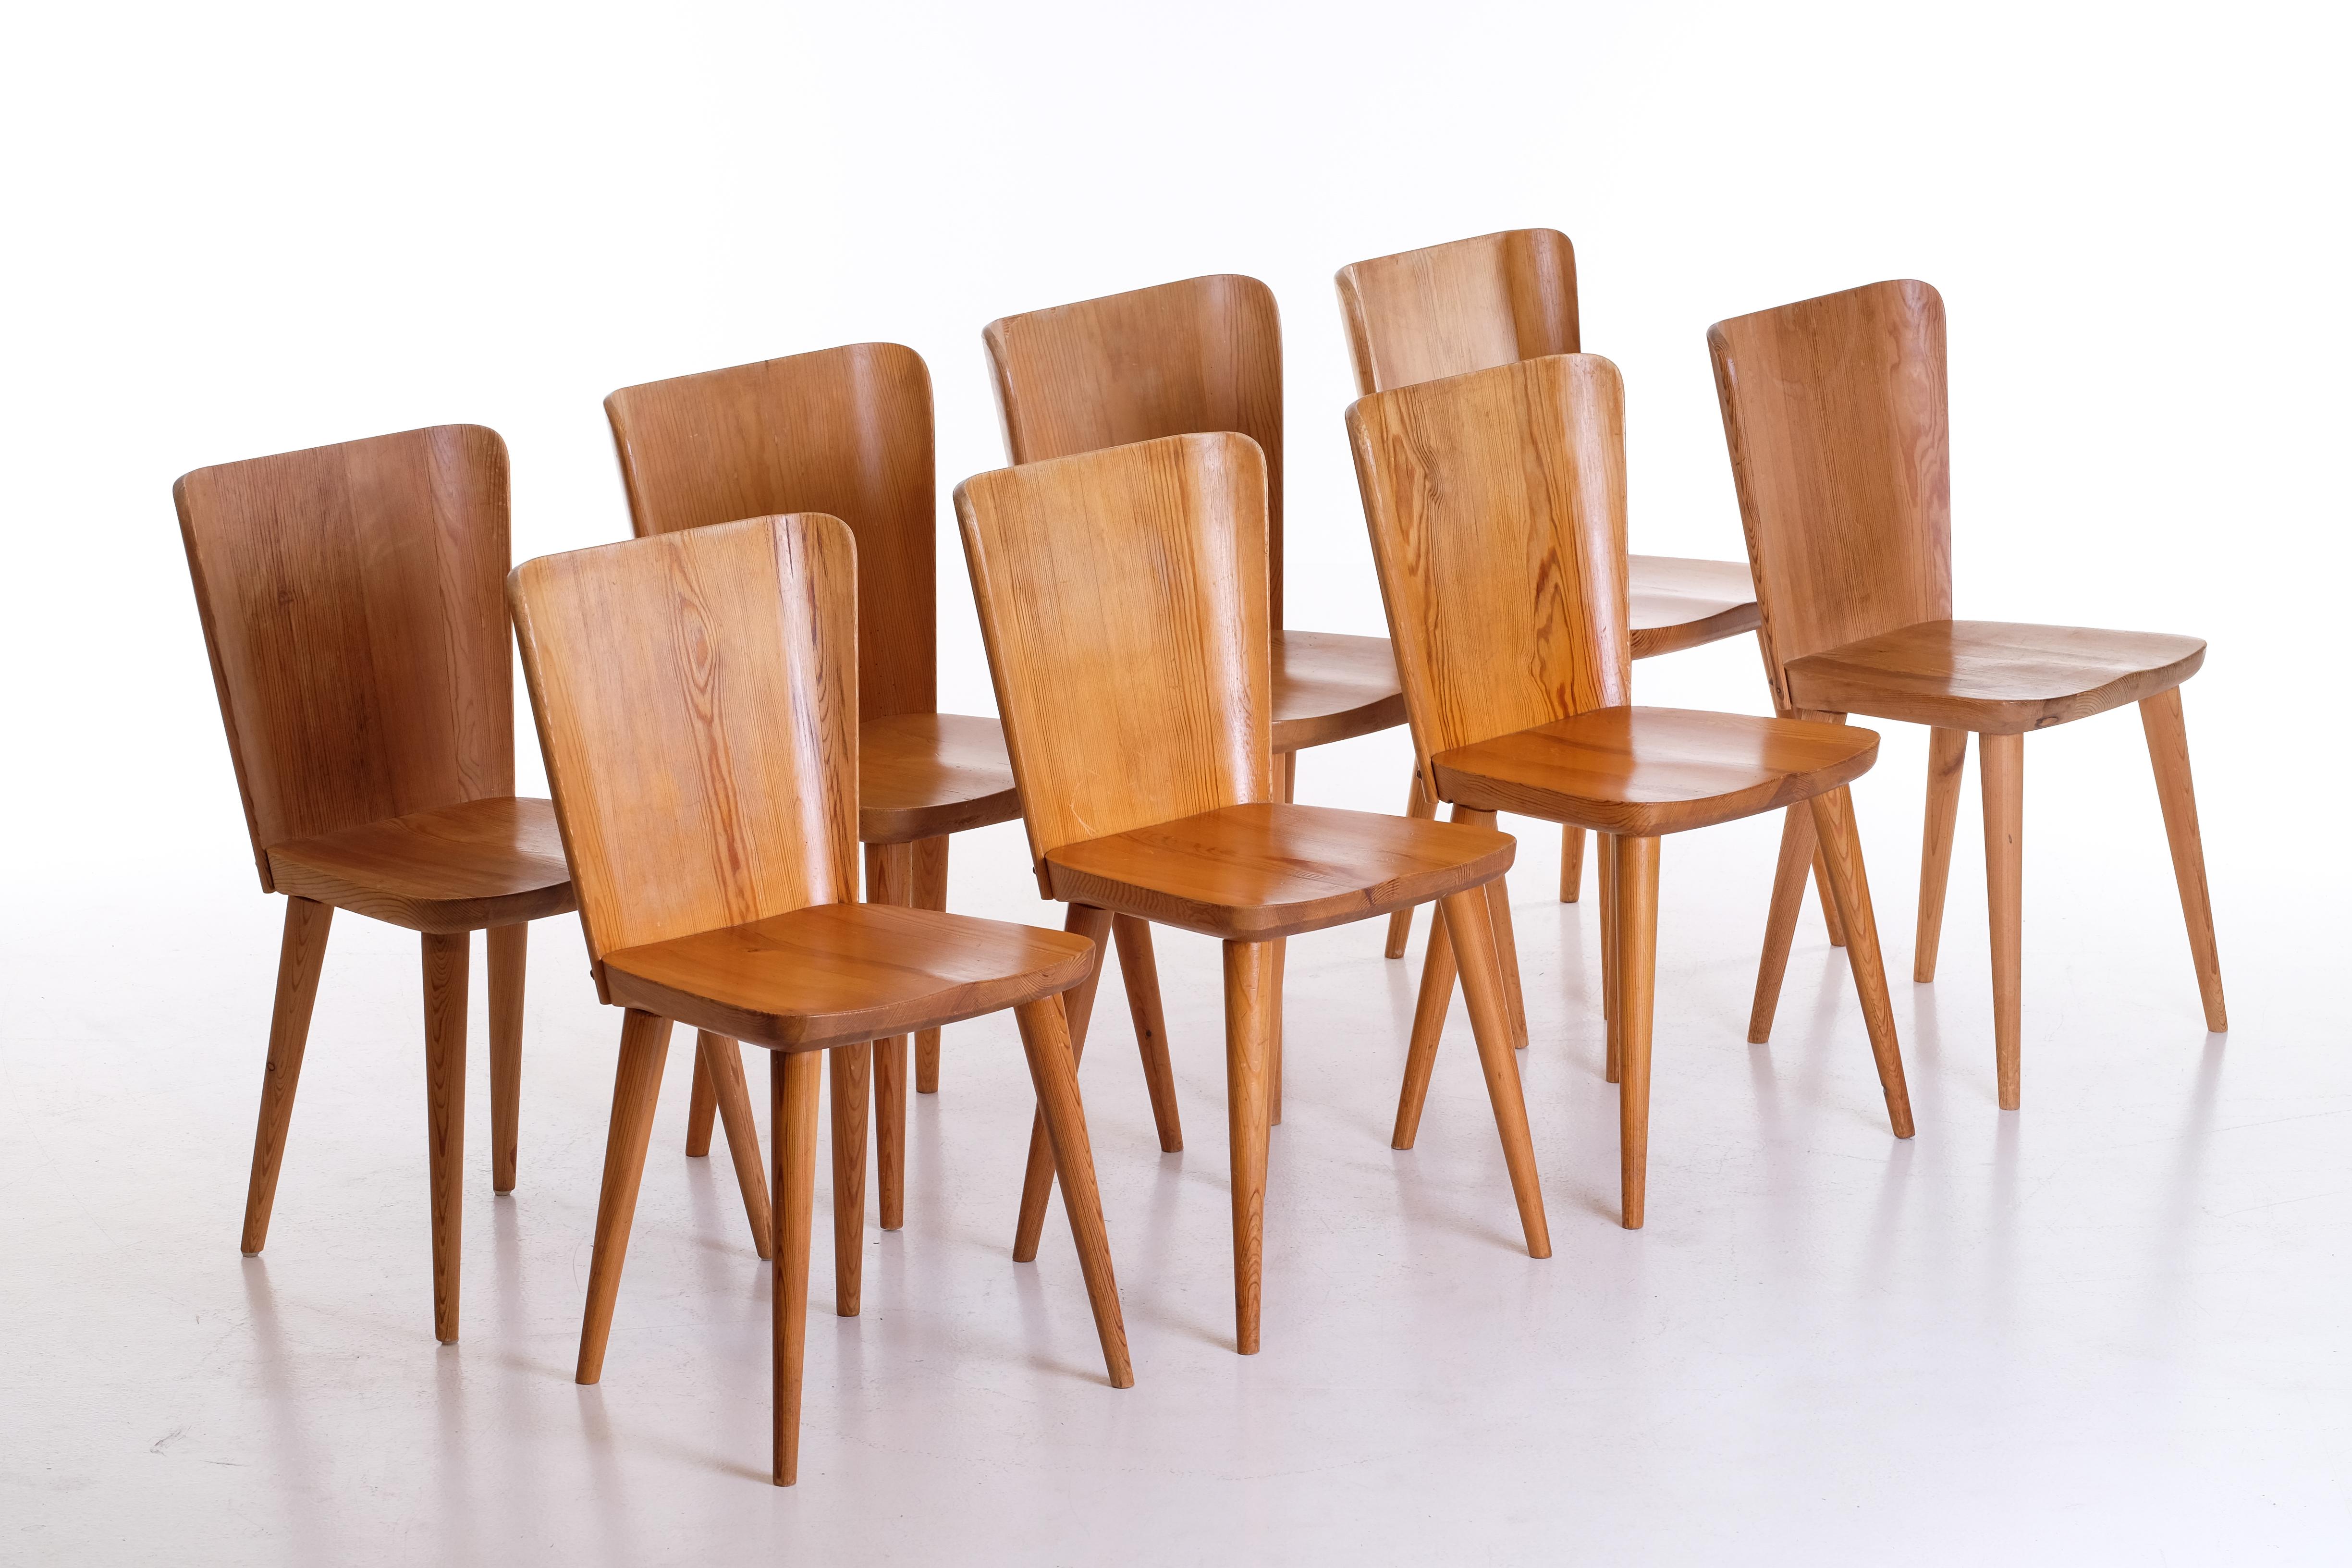 Set of 8 Swedish Pine Chairs by Göran Malmvall, Svensk Fur, 1950s In Good Condition For Sale In Stockholm, SE